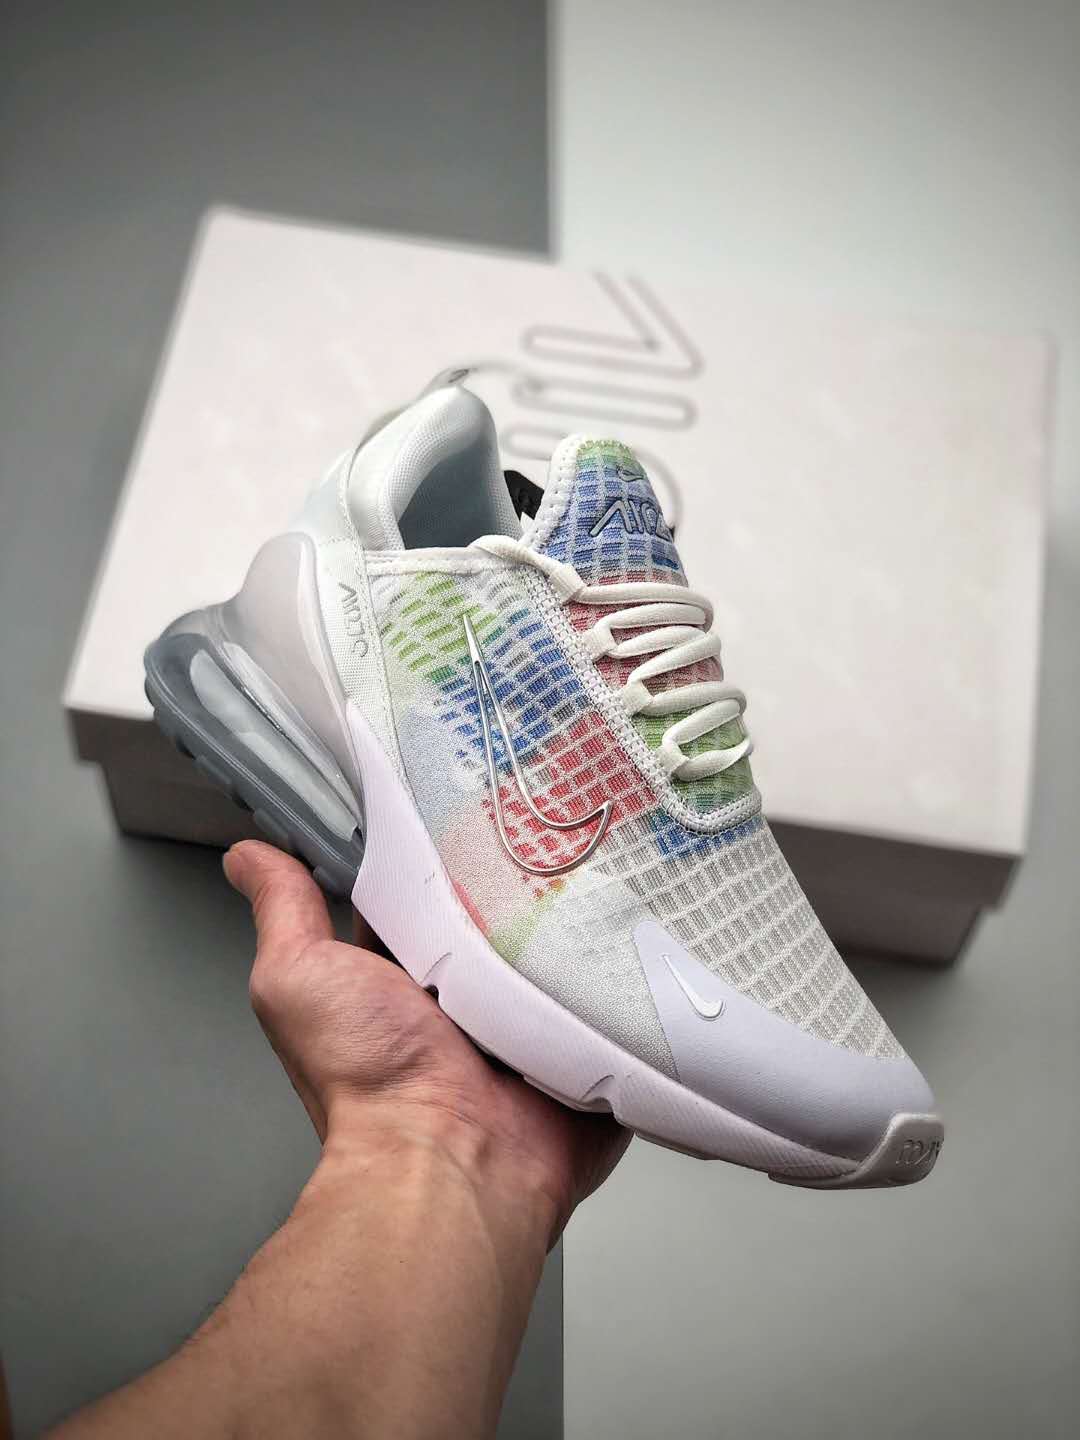 Nike Air Max 270 'Dusty Cactus' AH8050-001 - Stylish and Comfy Athletic Shoes